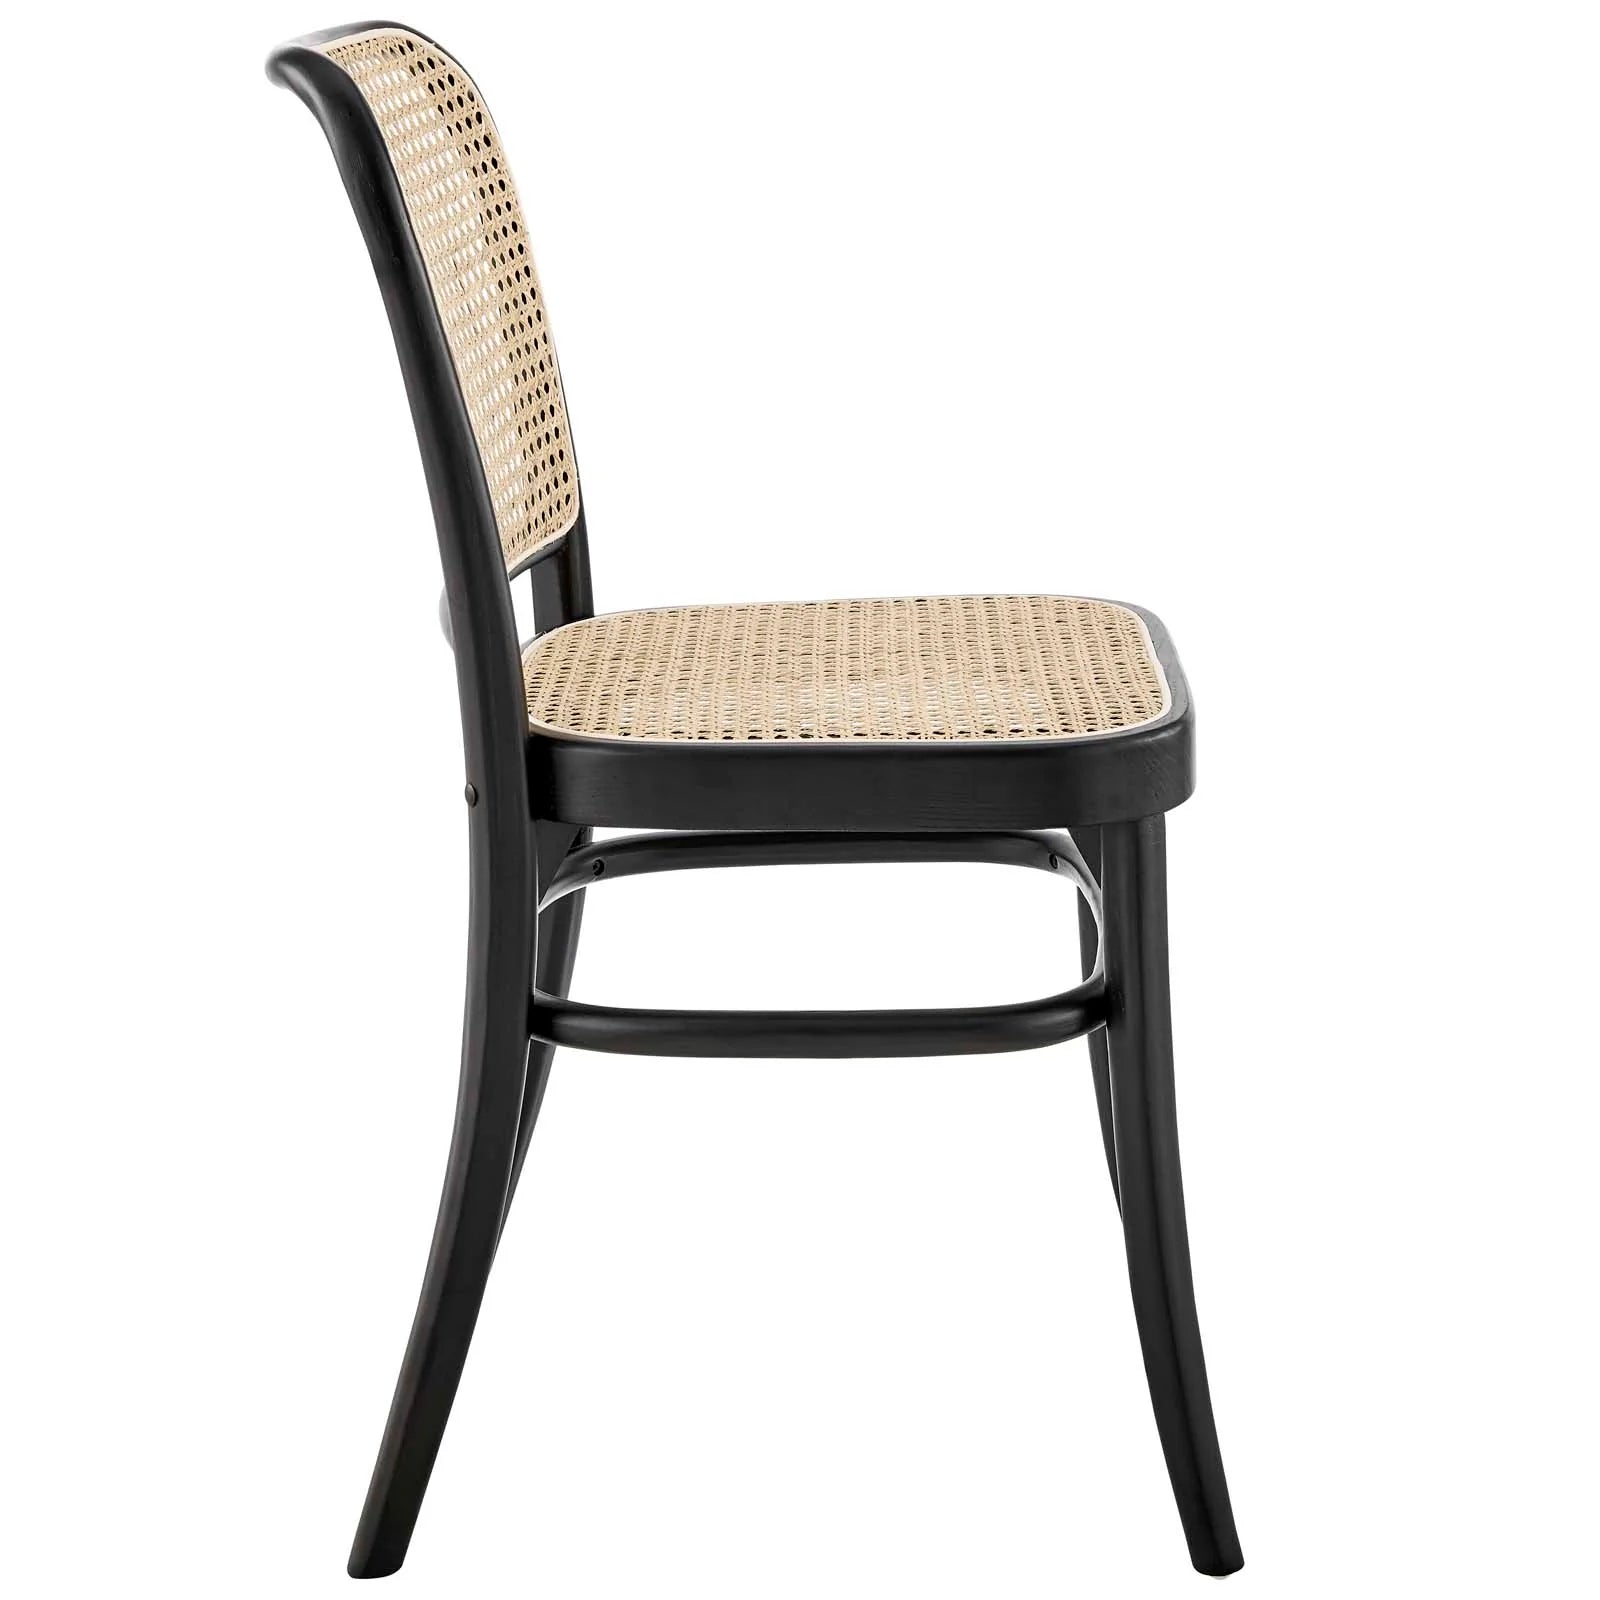 WINONA WOOD DINING SIDE CHAIR - BLACK